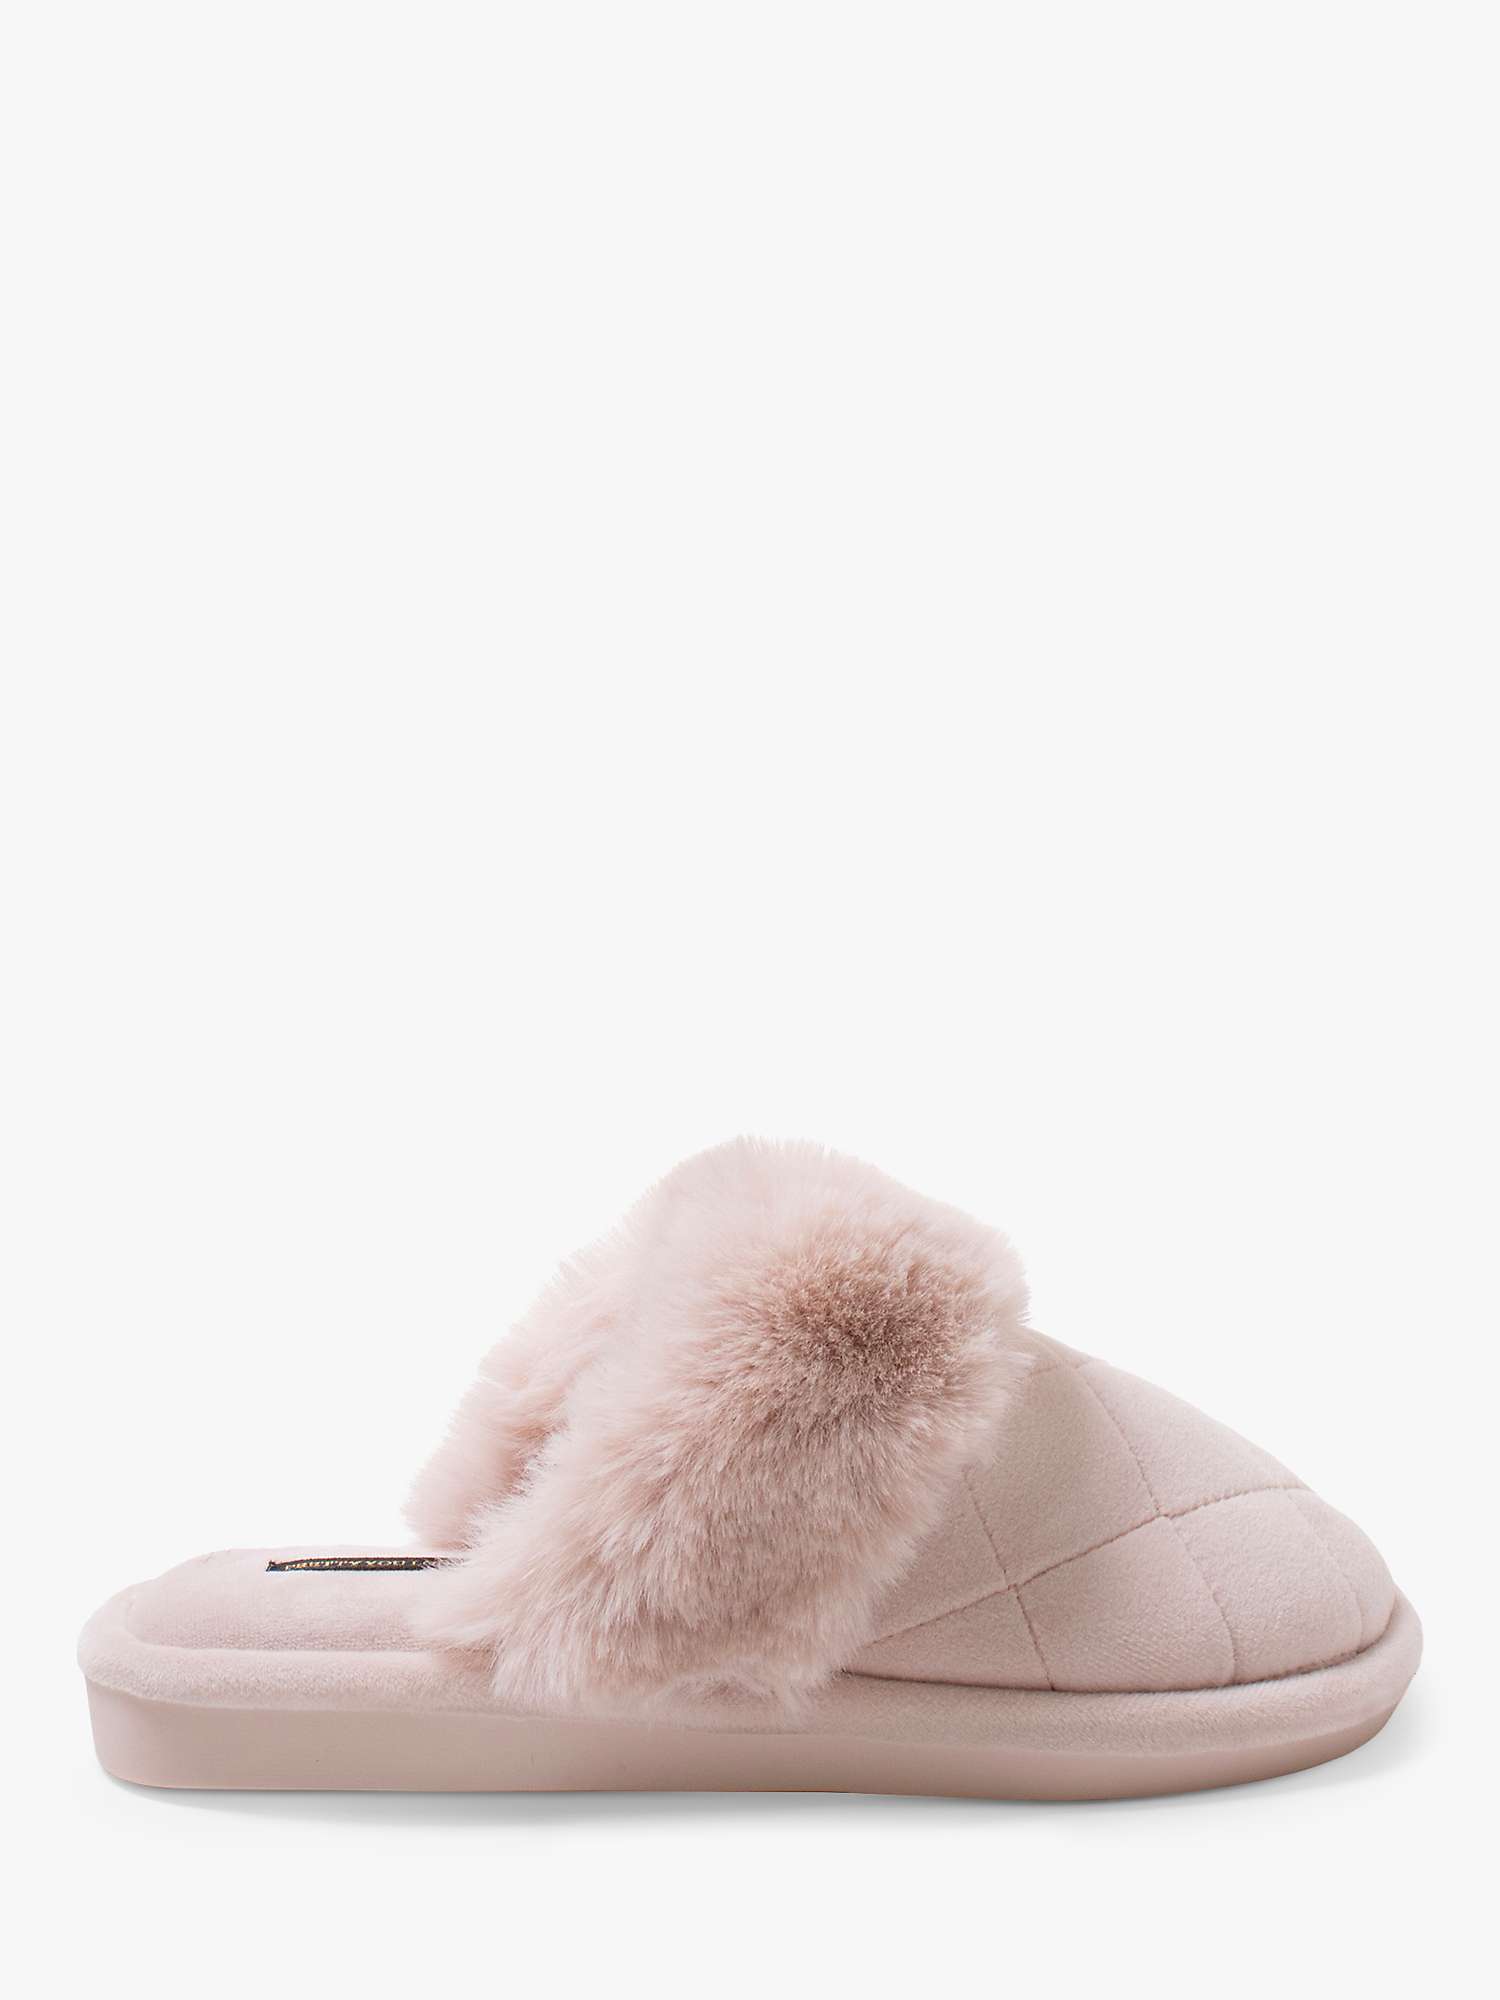 Buy Pretty You London Gigi Quilted Mule Slippers Online at johnlewis.com